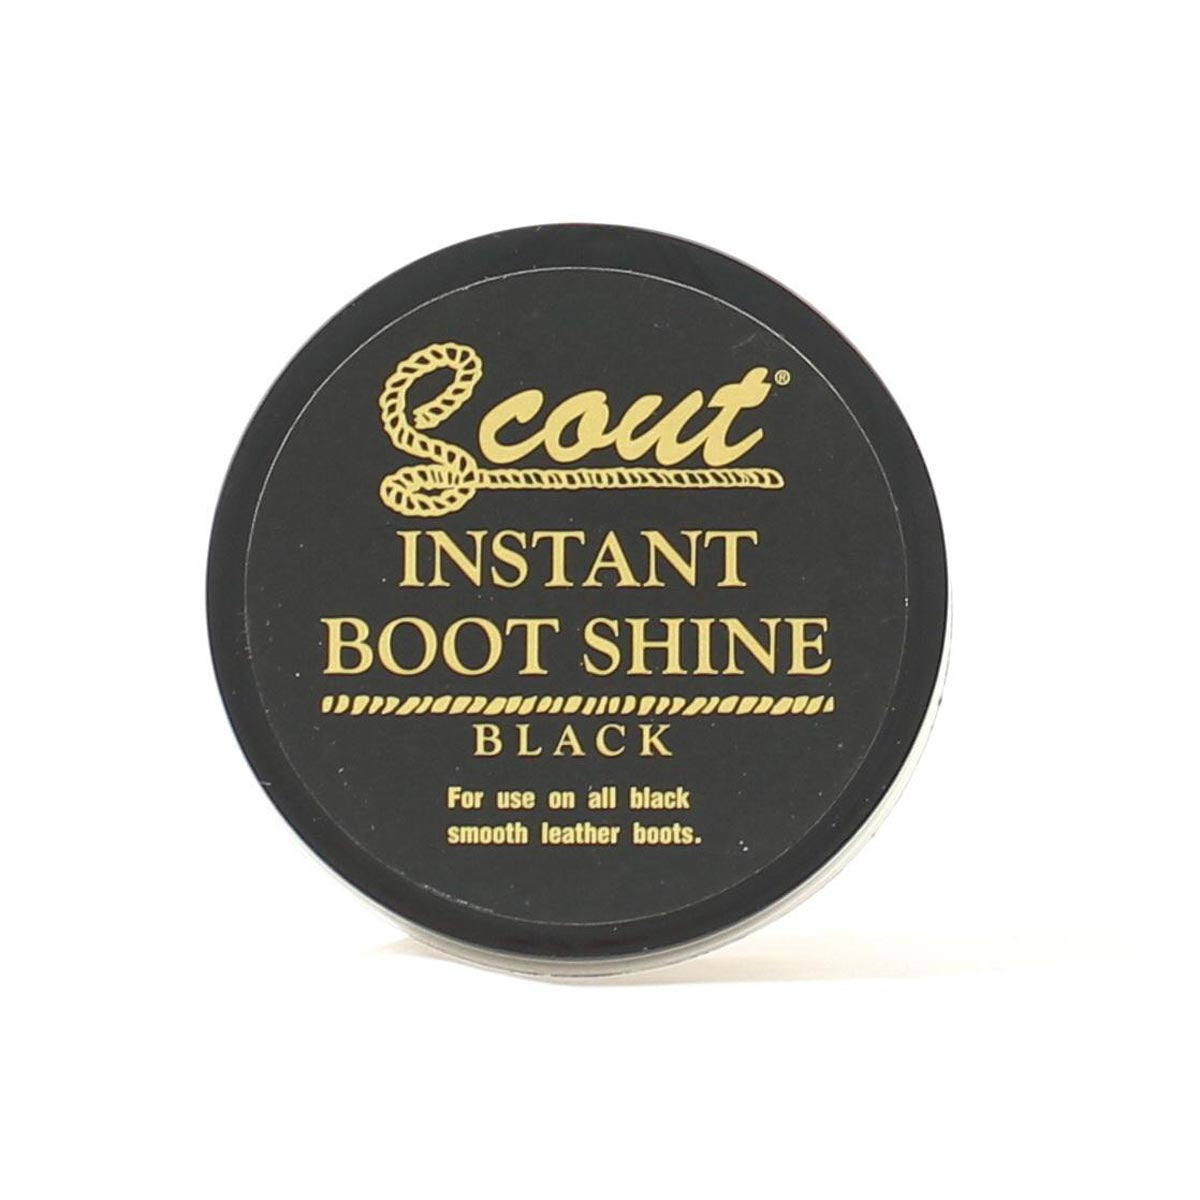 SCOUT INSTANT BOOT SHINE 6 OZ